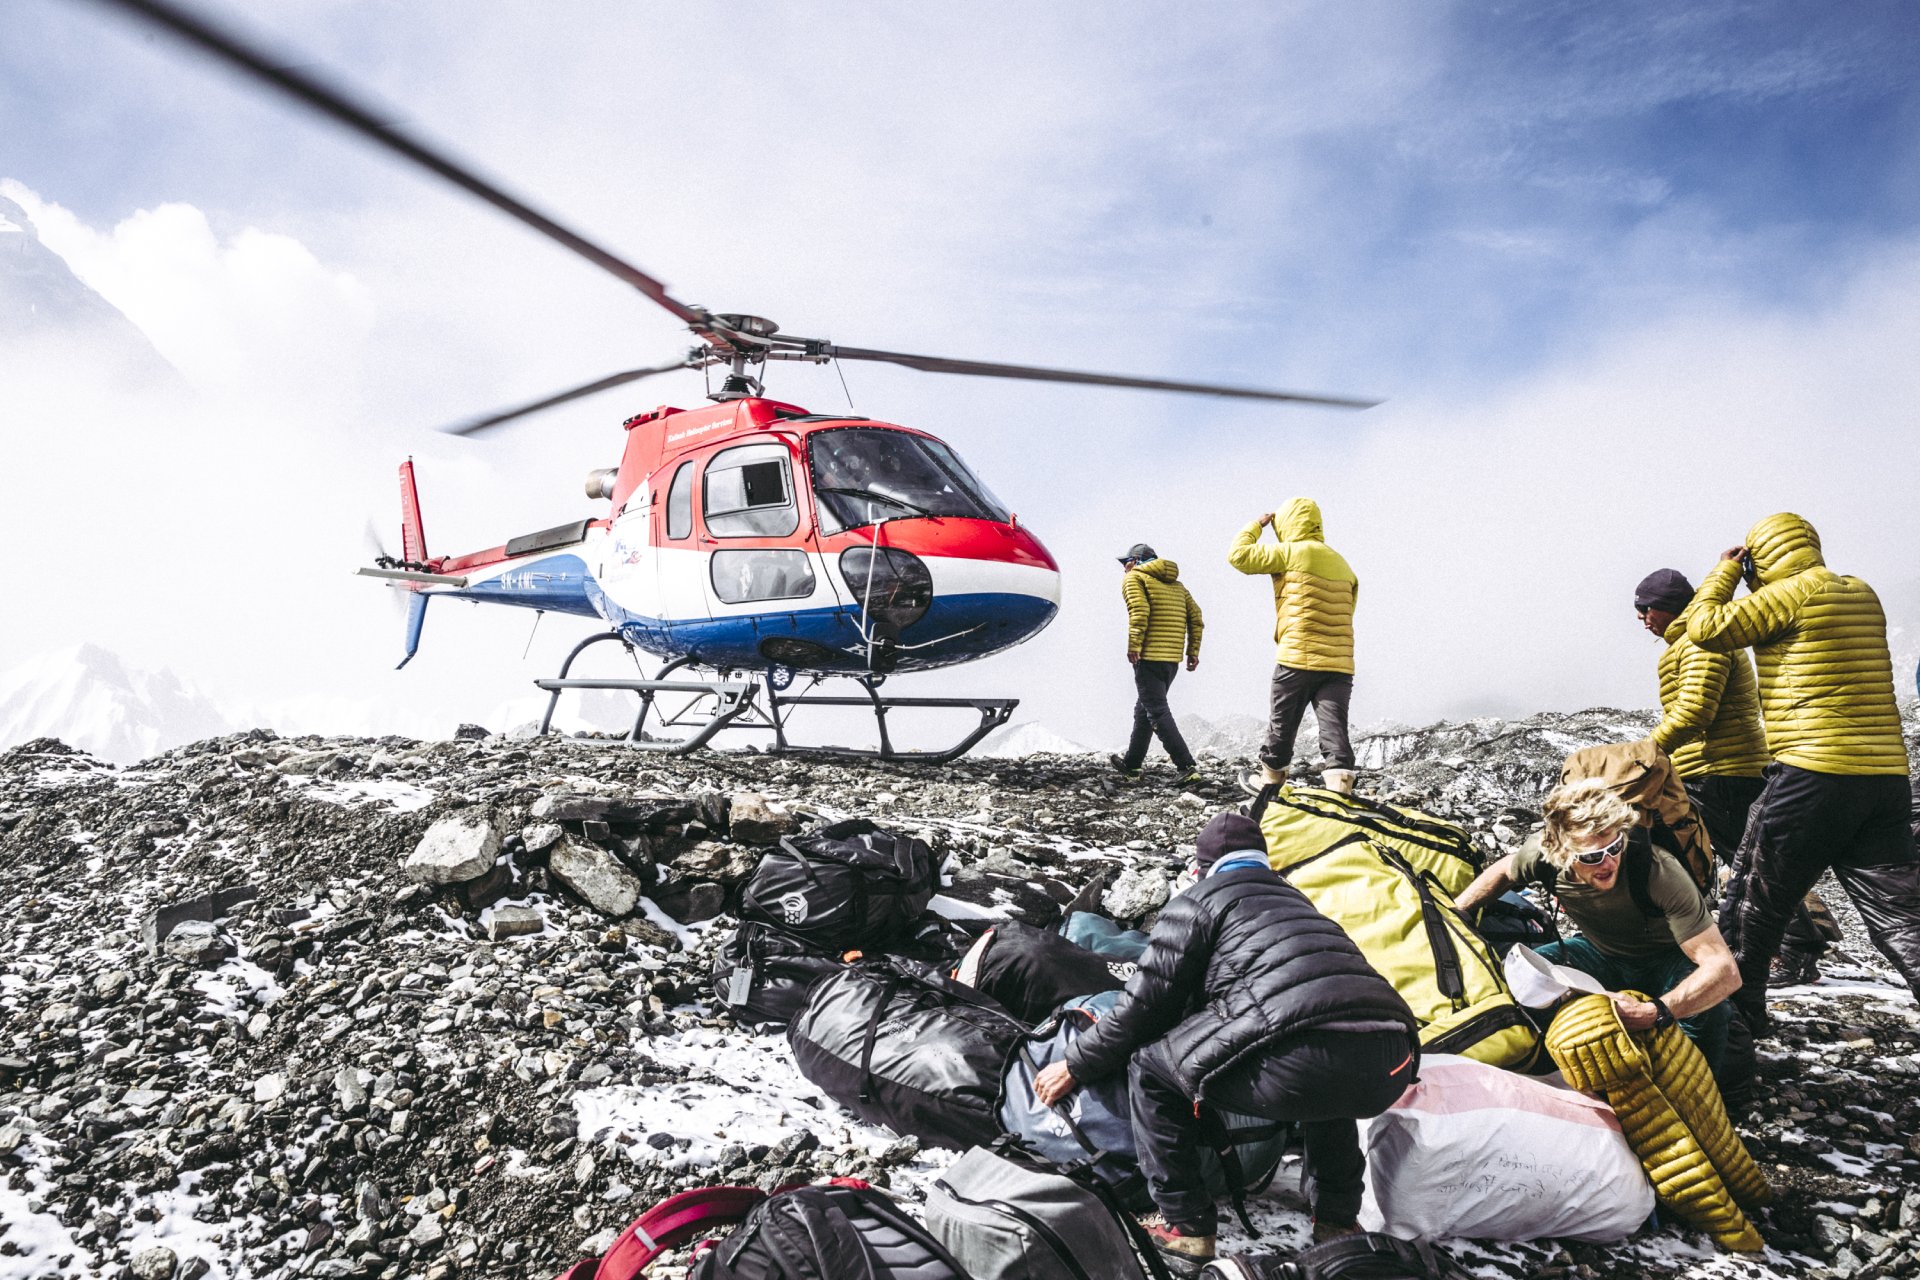 Mission Briefs: Global Rescue In Action – May